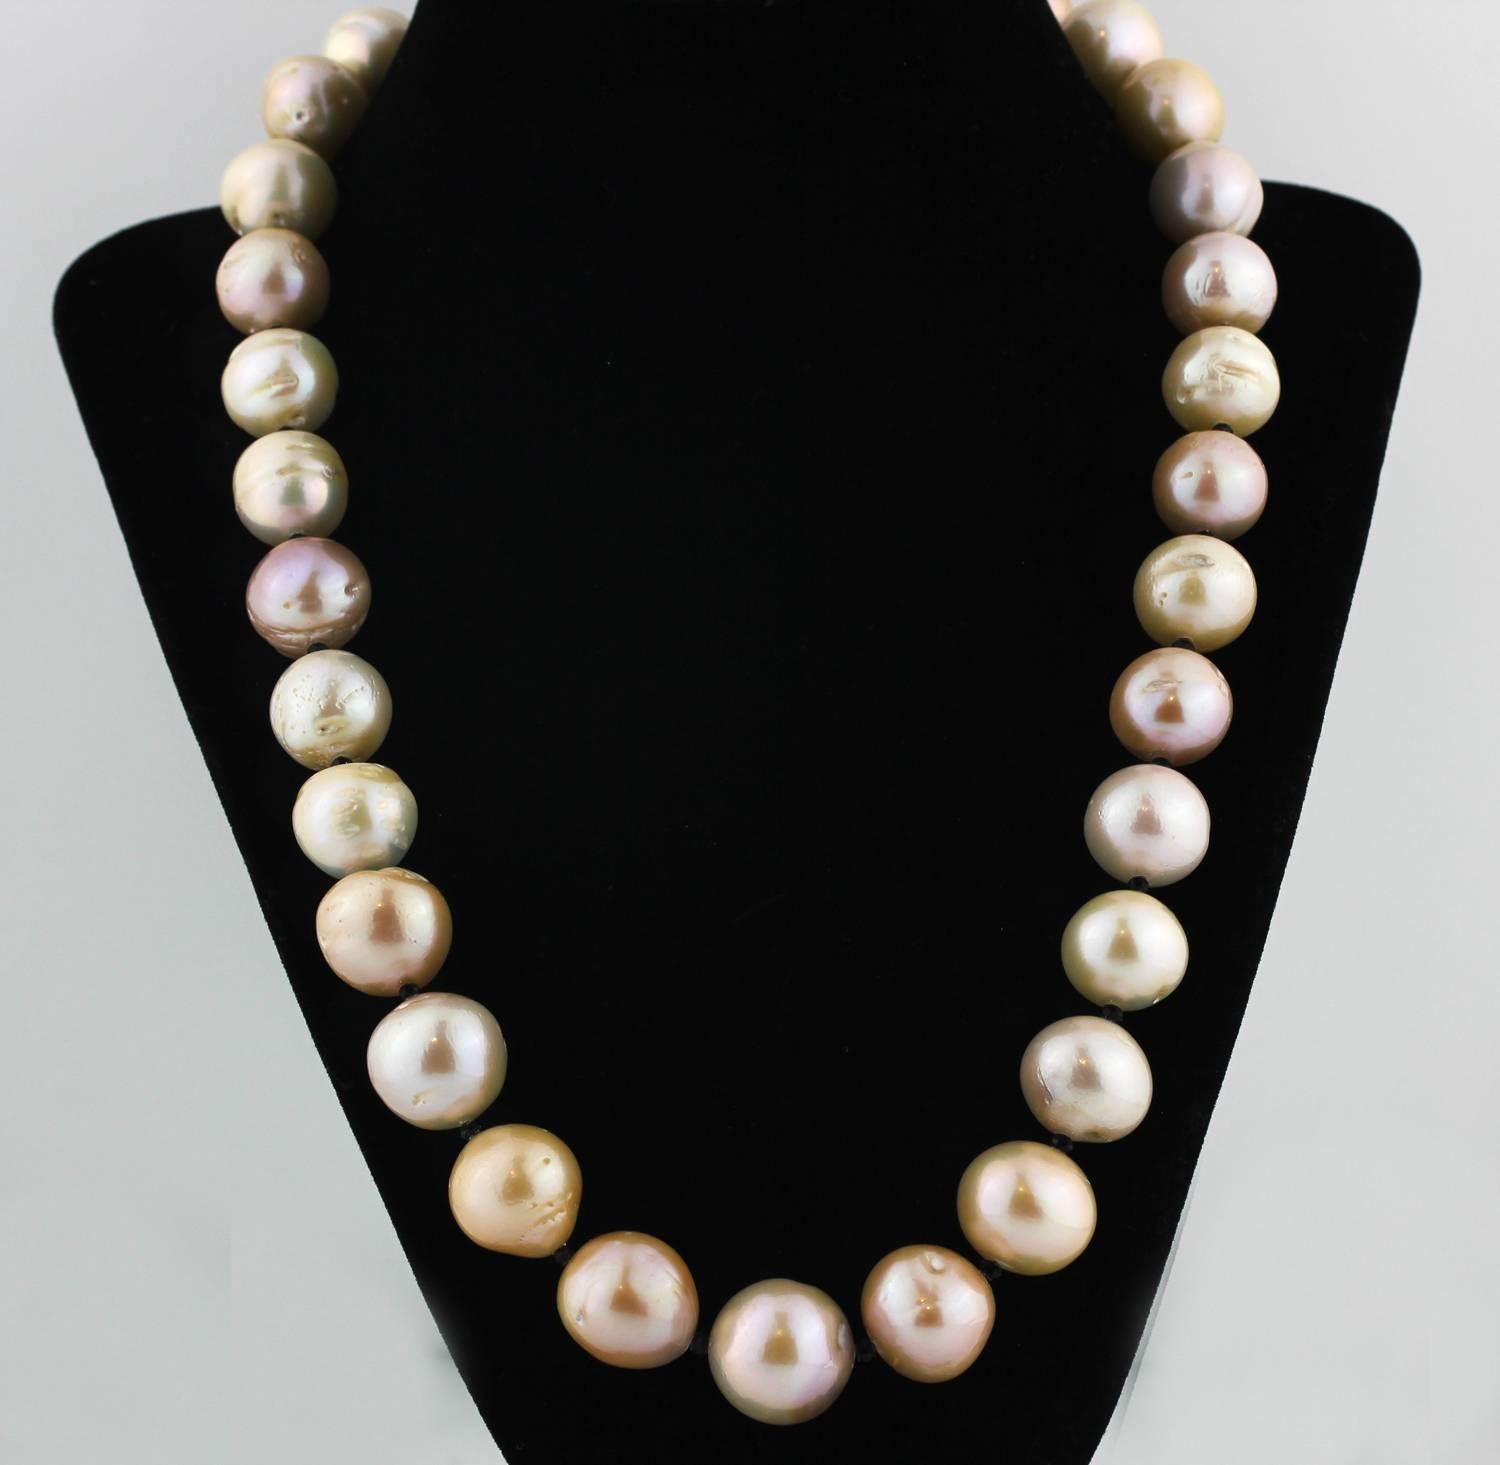 Huge, big round imperfect slightly iridescent goldy champagne tone cultured Tahitian Pearl necklace.  These pearls  reflect differently on different color backgrounds.  Just look at the georgeous play of color!   The necklace has tiny black onyx